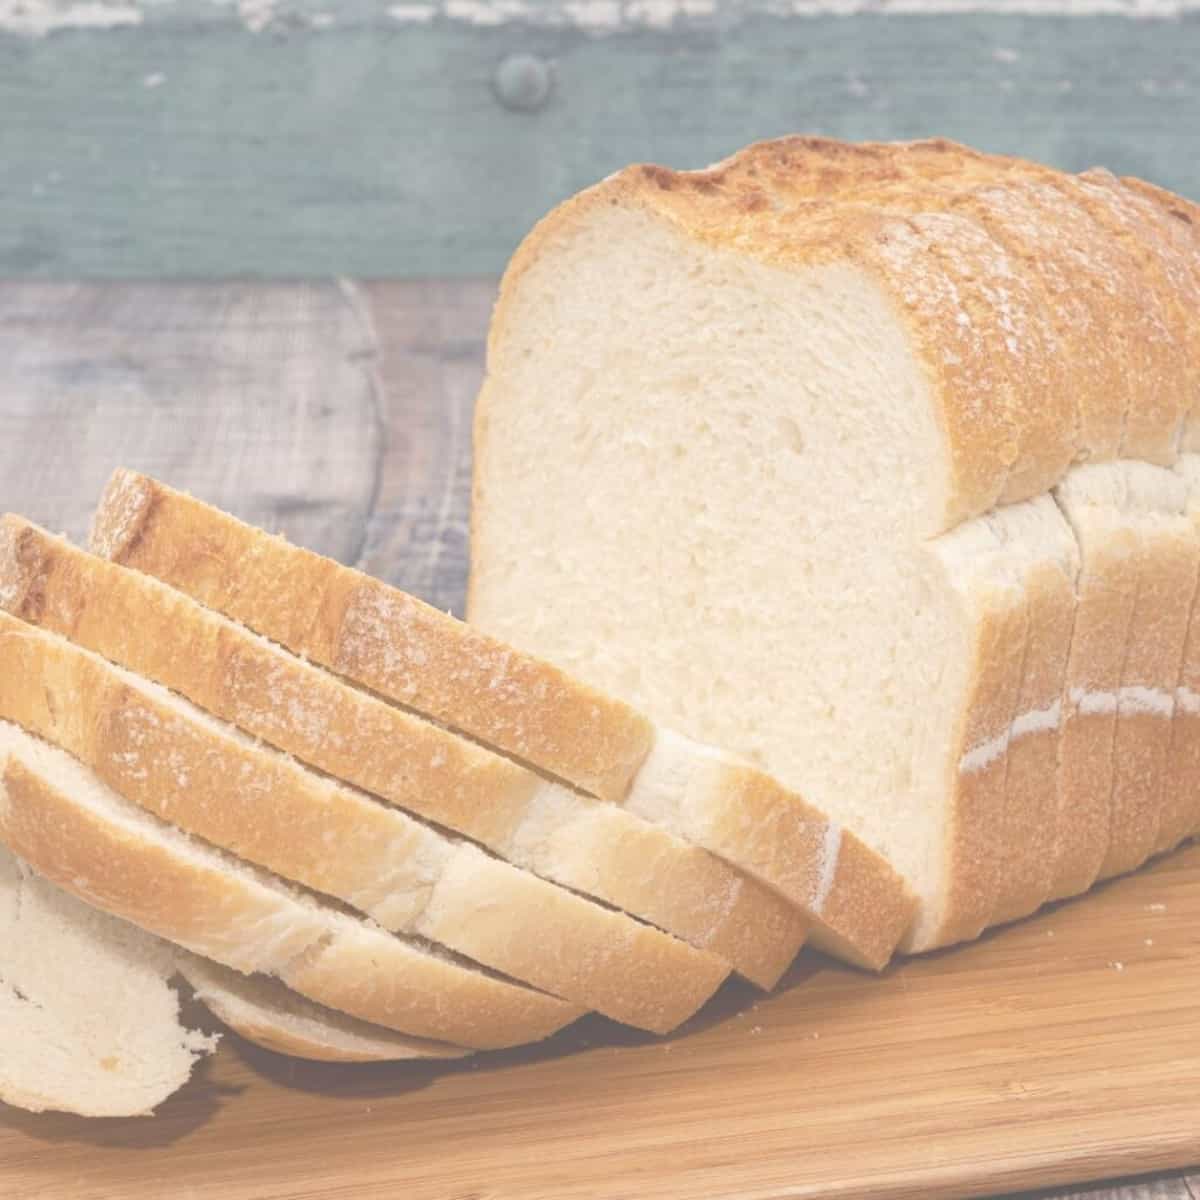 A close-up photo of a loaf of easy white bread. The bread is golden brown on the outside and has a soft and fluffy texture on the inside